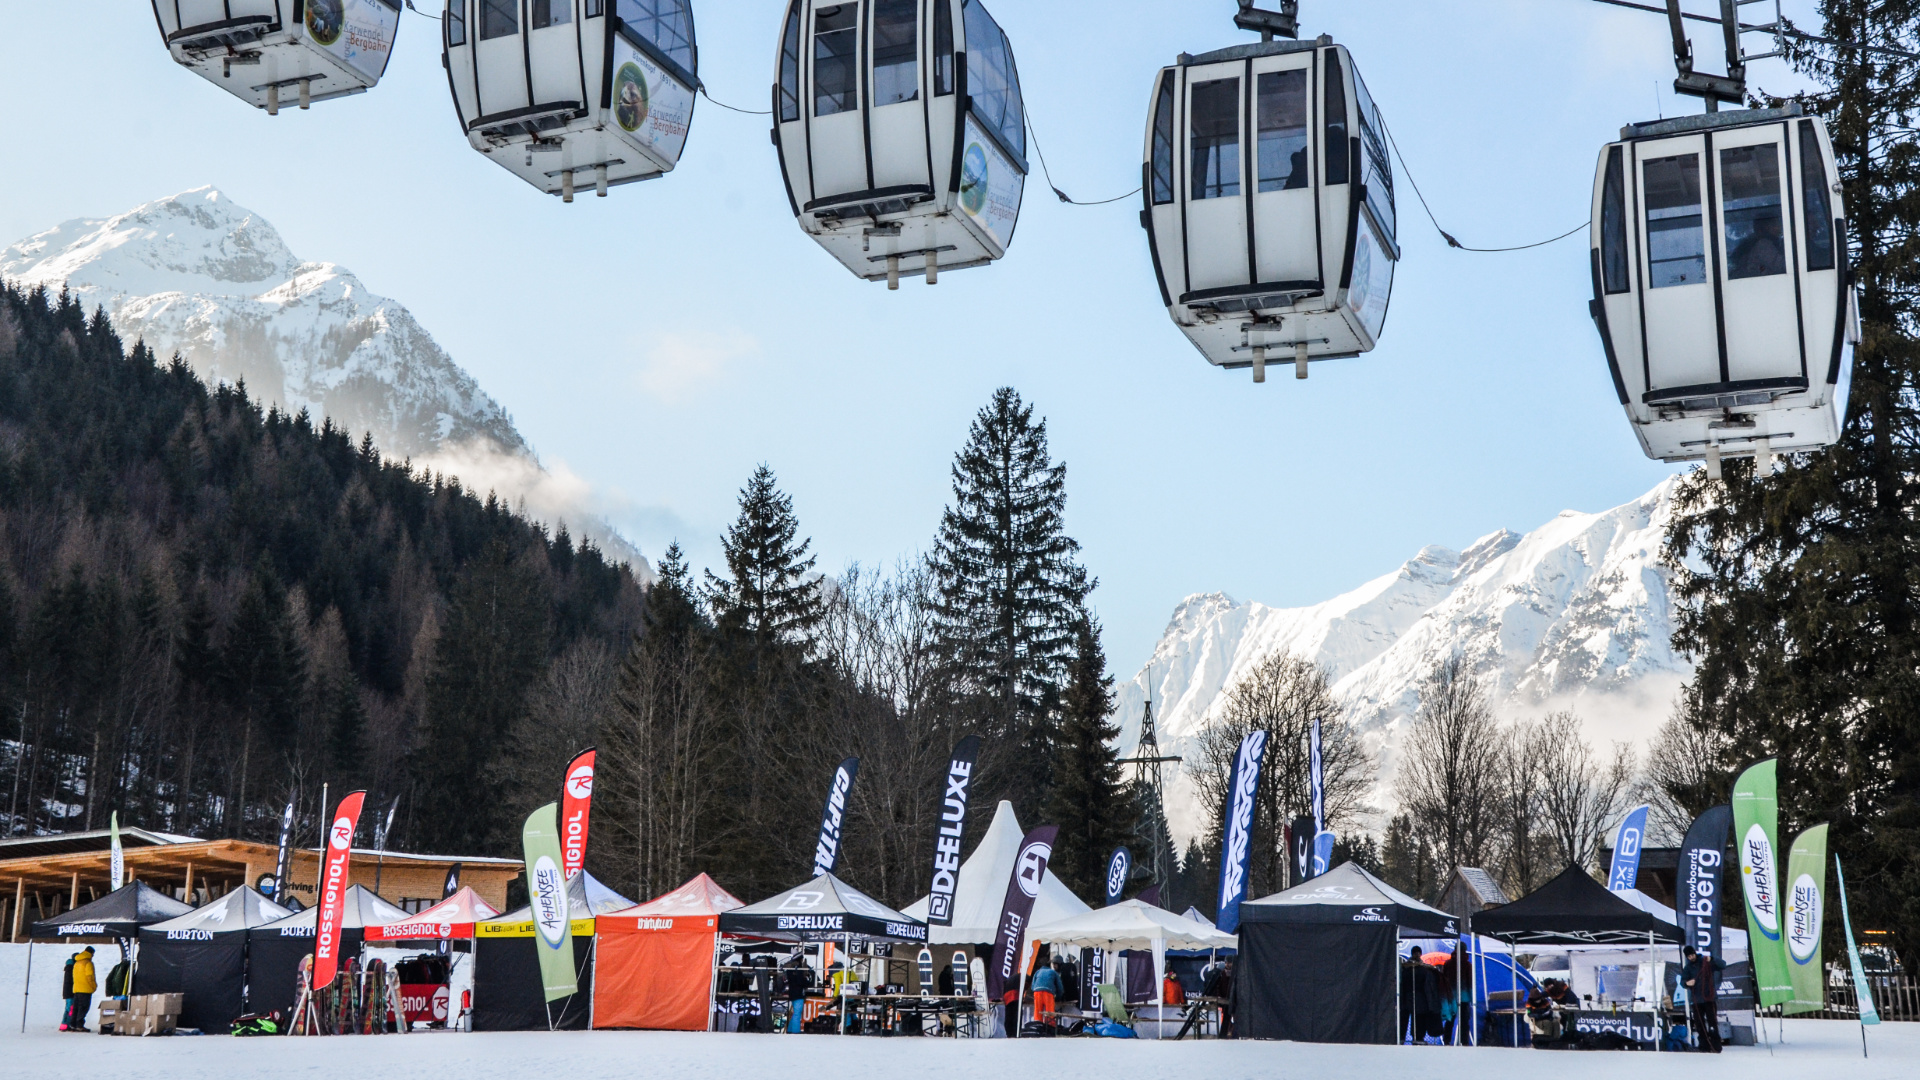 Information booth at the Splitboard Festival at Lake Achensee.